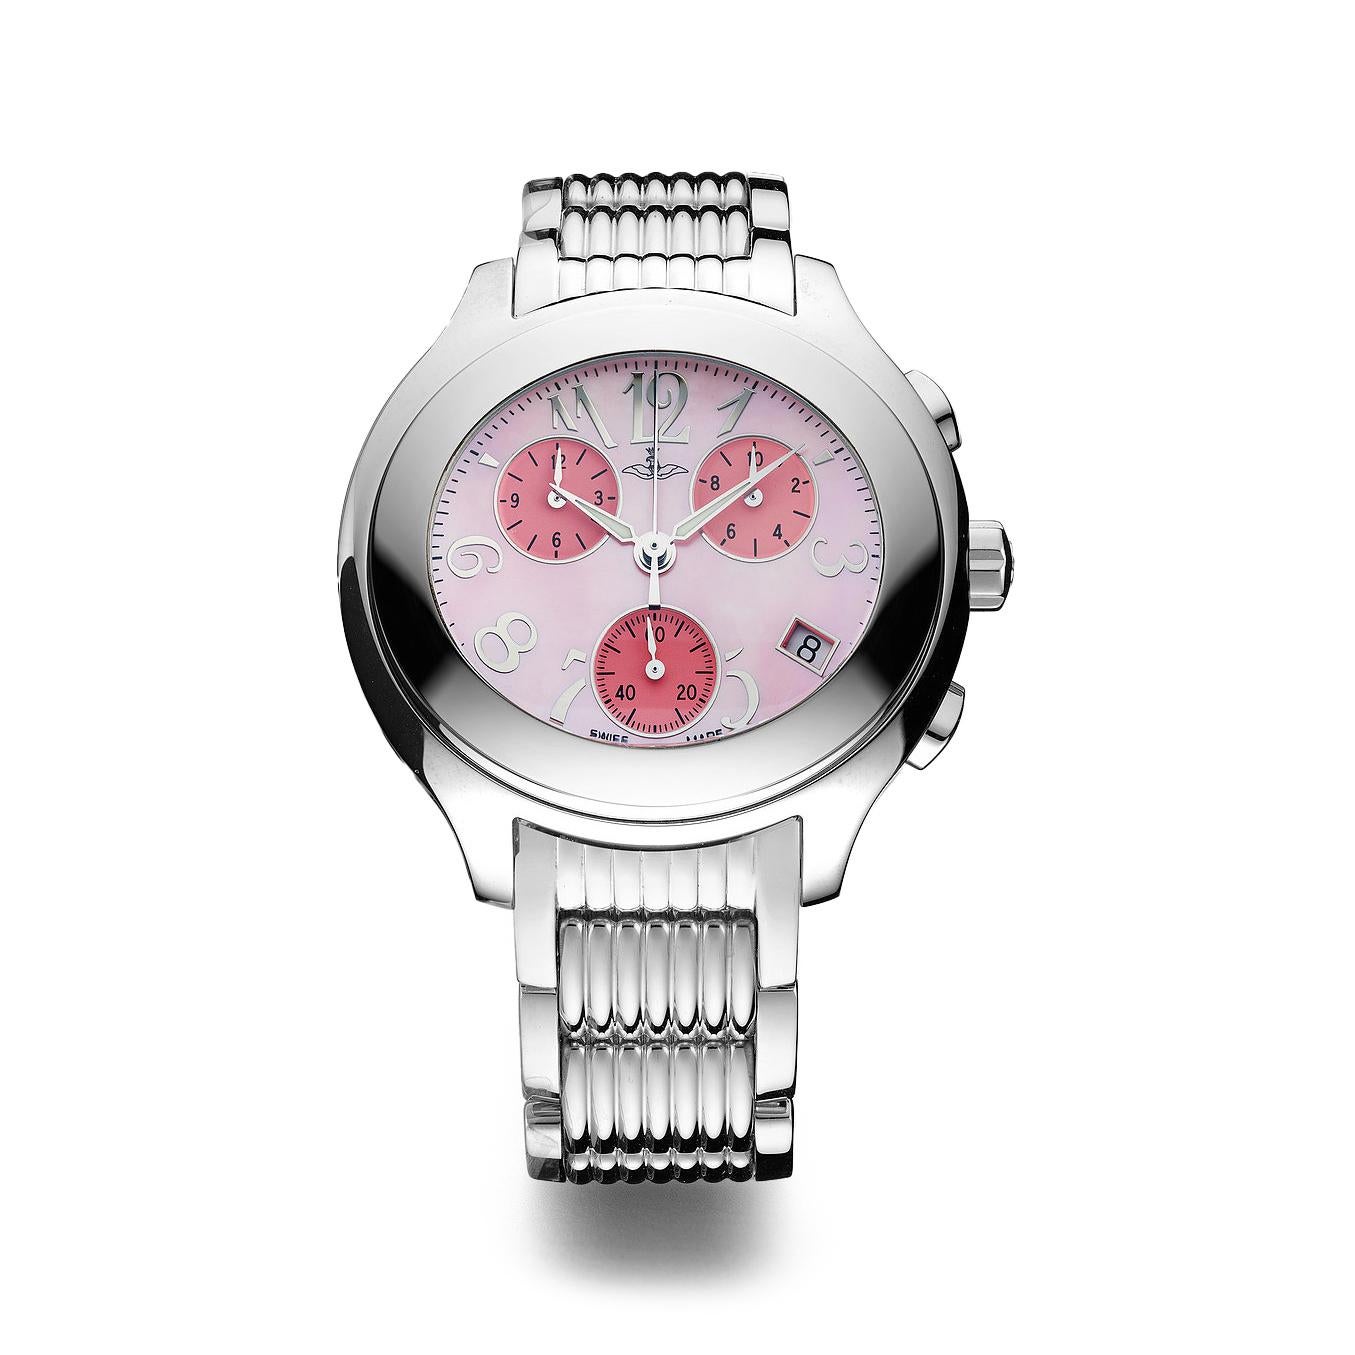 Chronograph watch in steel set with pink mother of pearl dial steel bracelet quartz movement.        